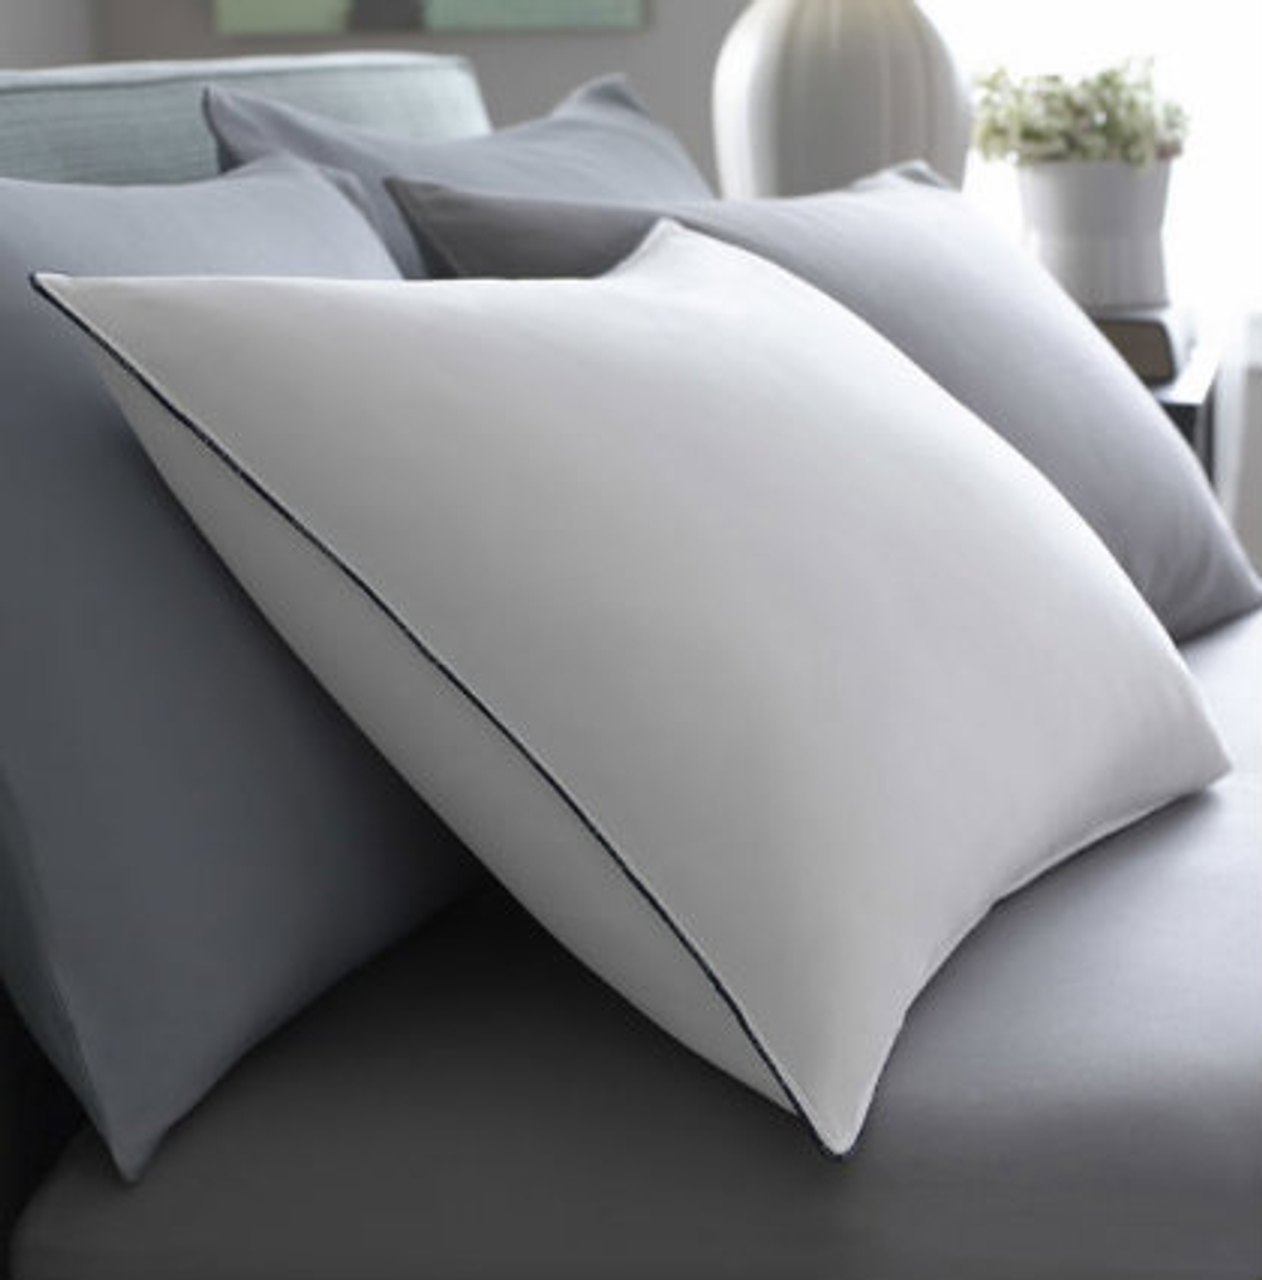 best down feather pillow